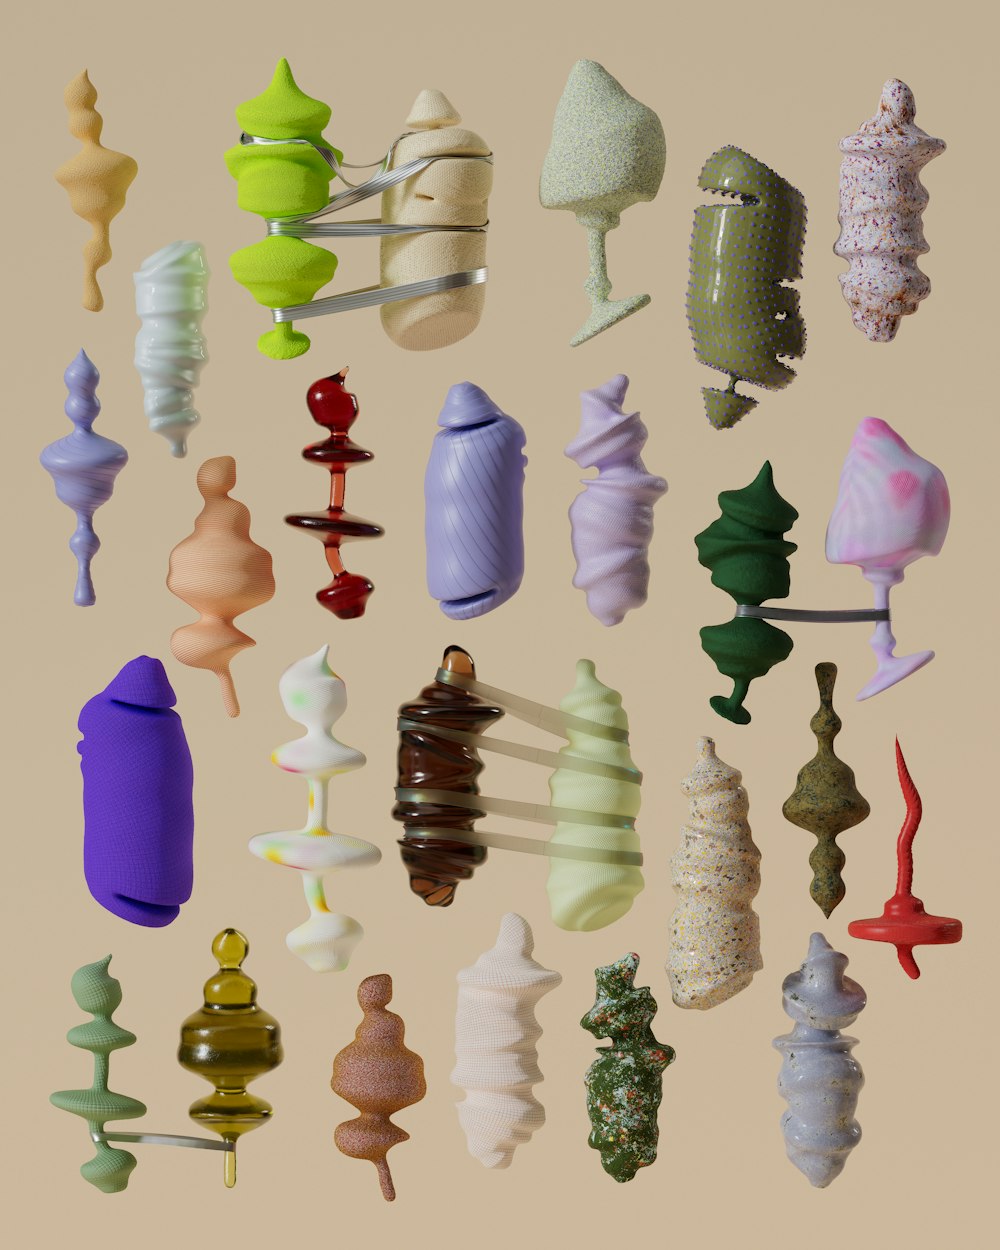 a collection of different colored objects